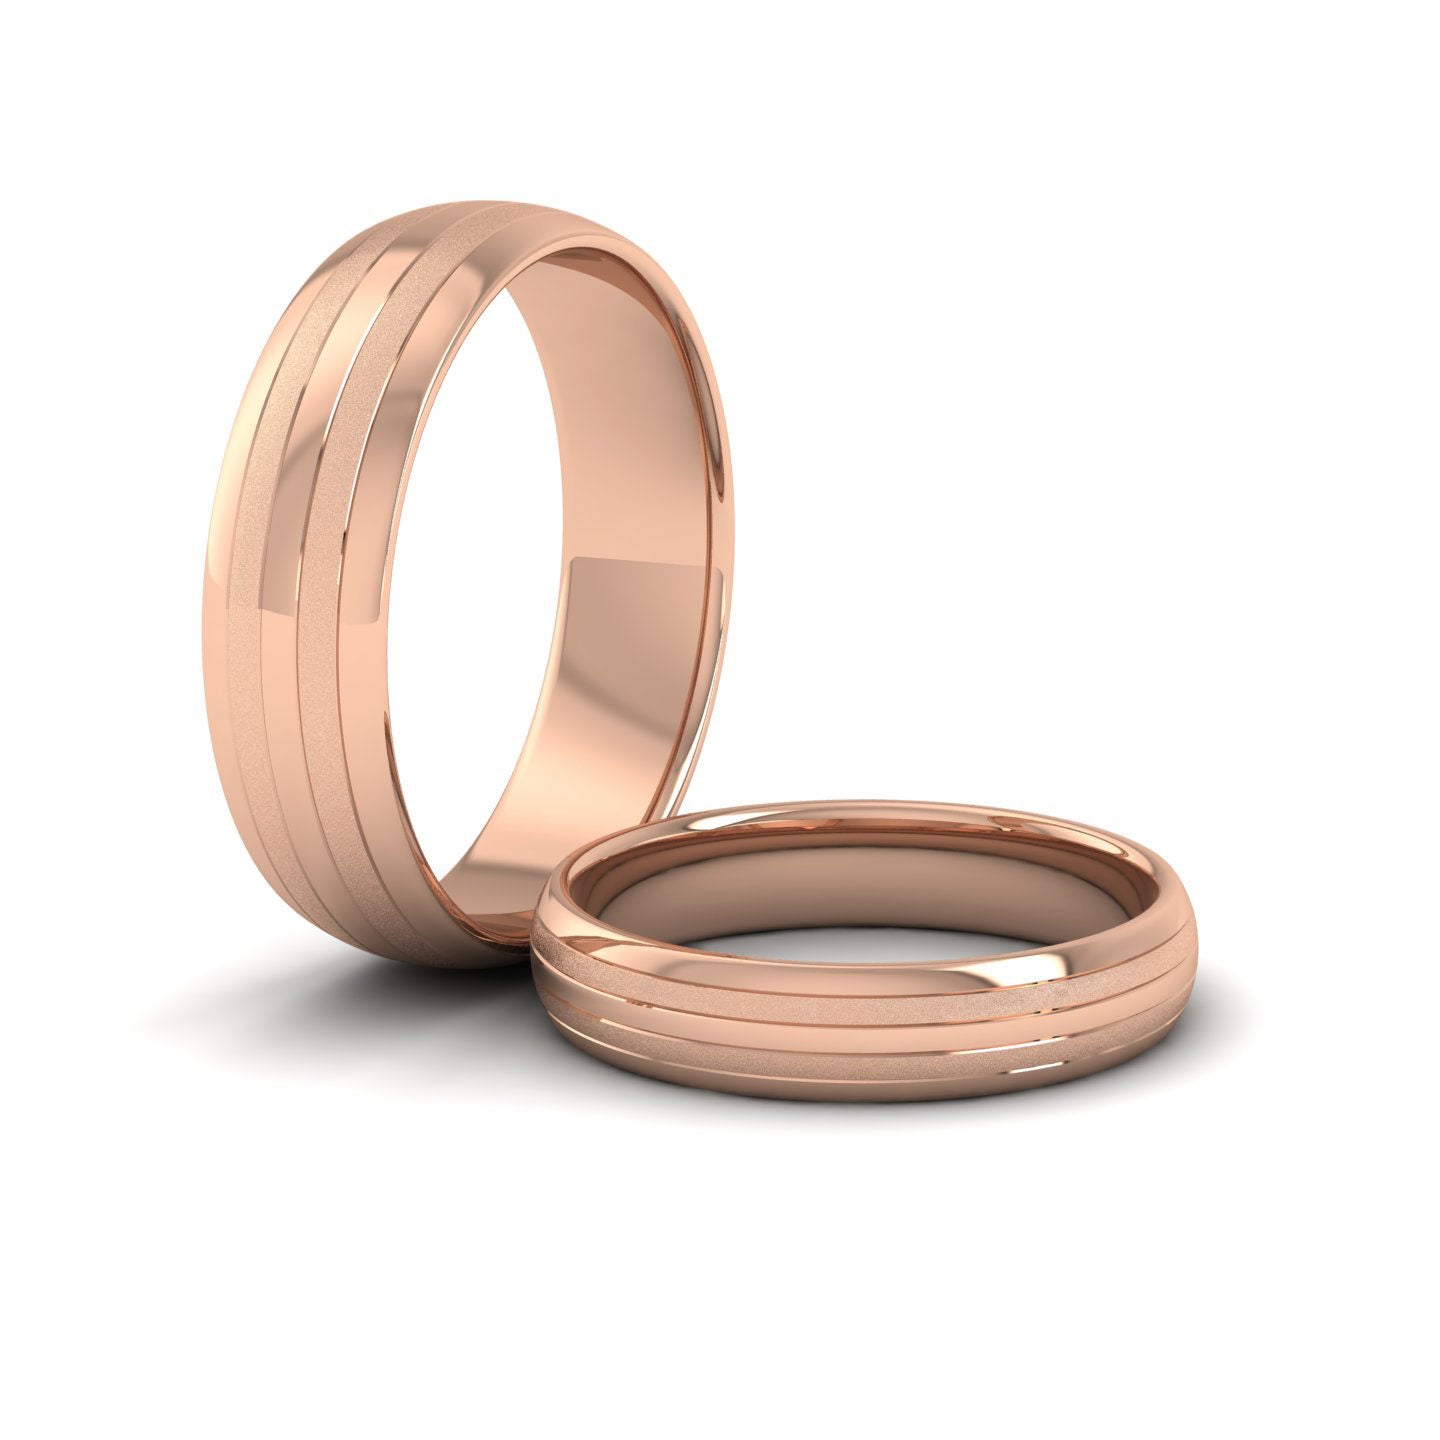 Four Line Pattern With Shiny And Matt Finish 9ct Rose Gold 6mm Wedding Ring